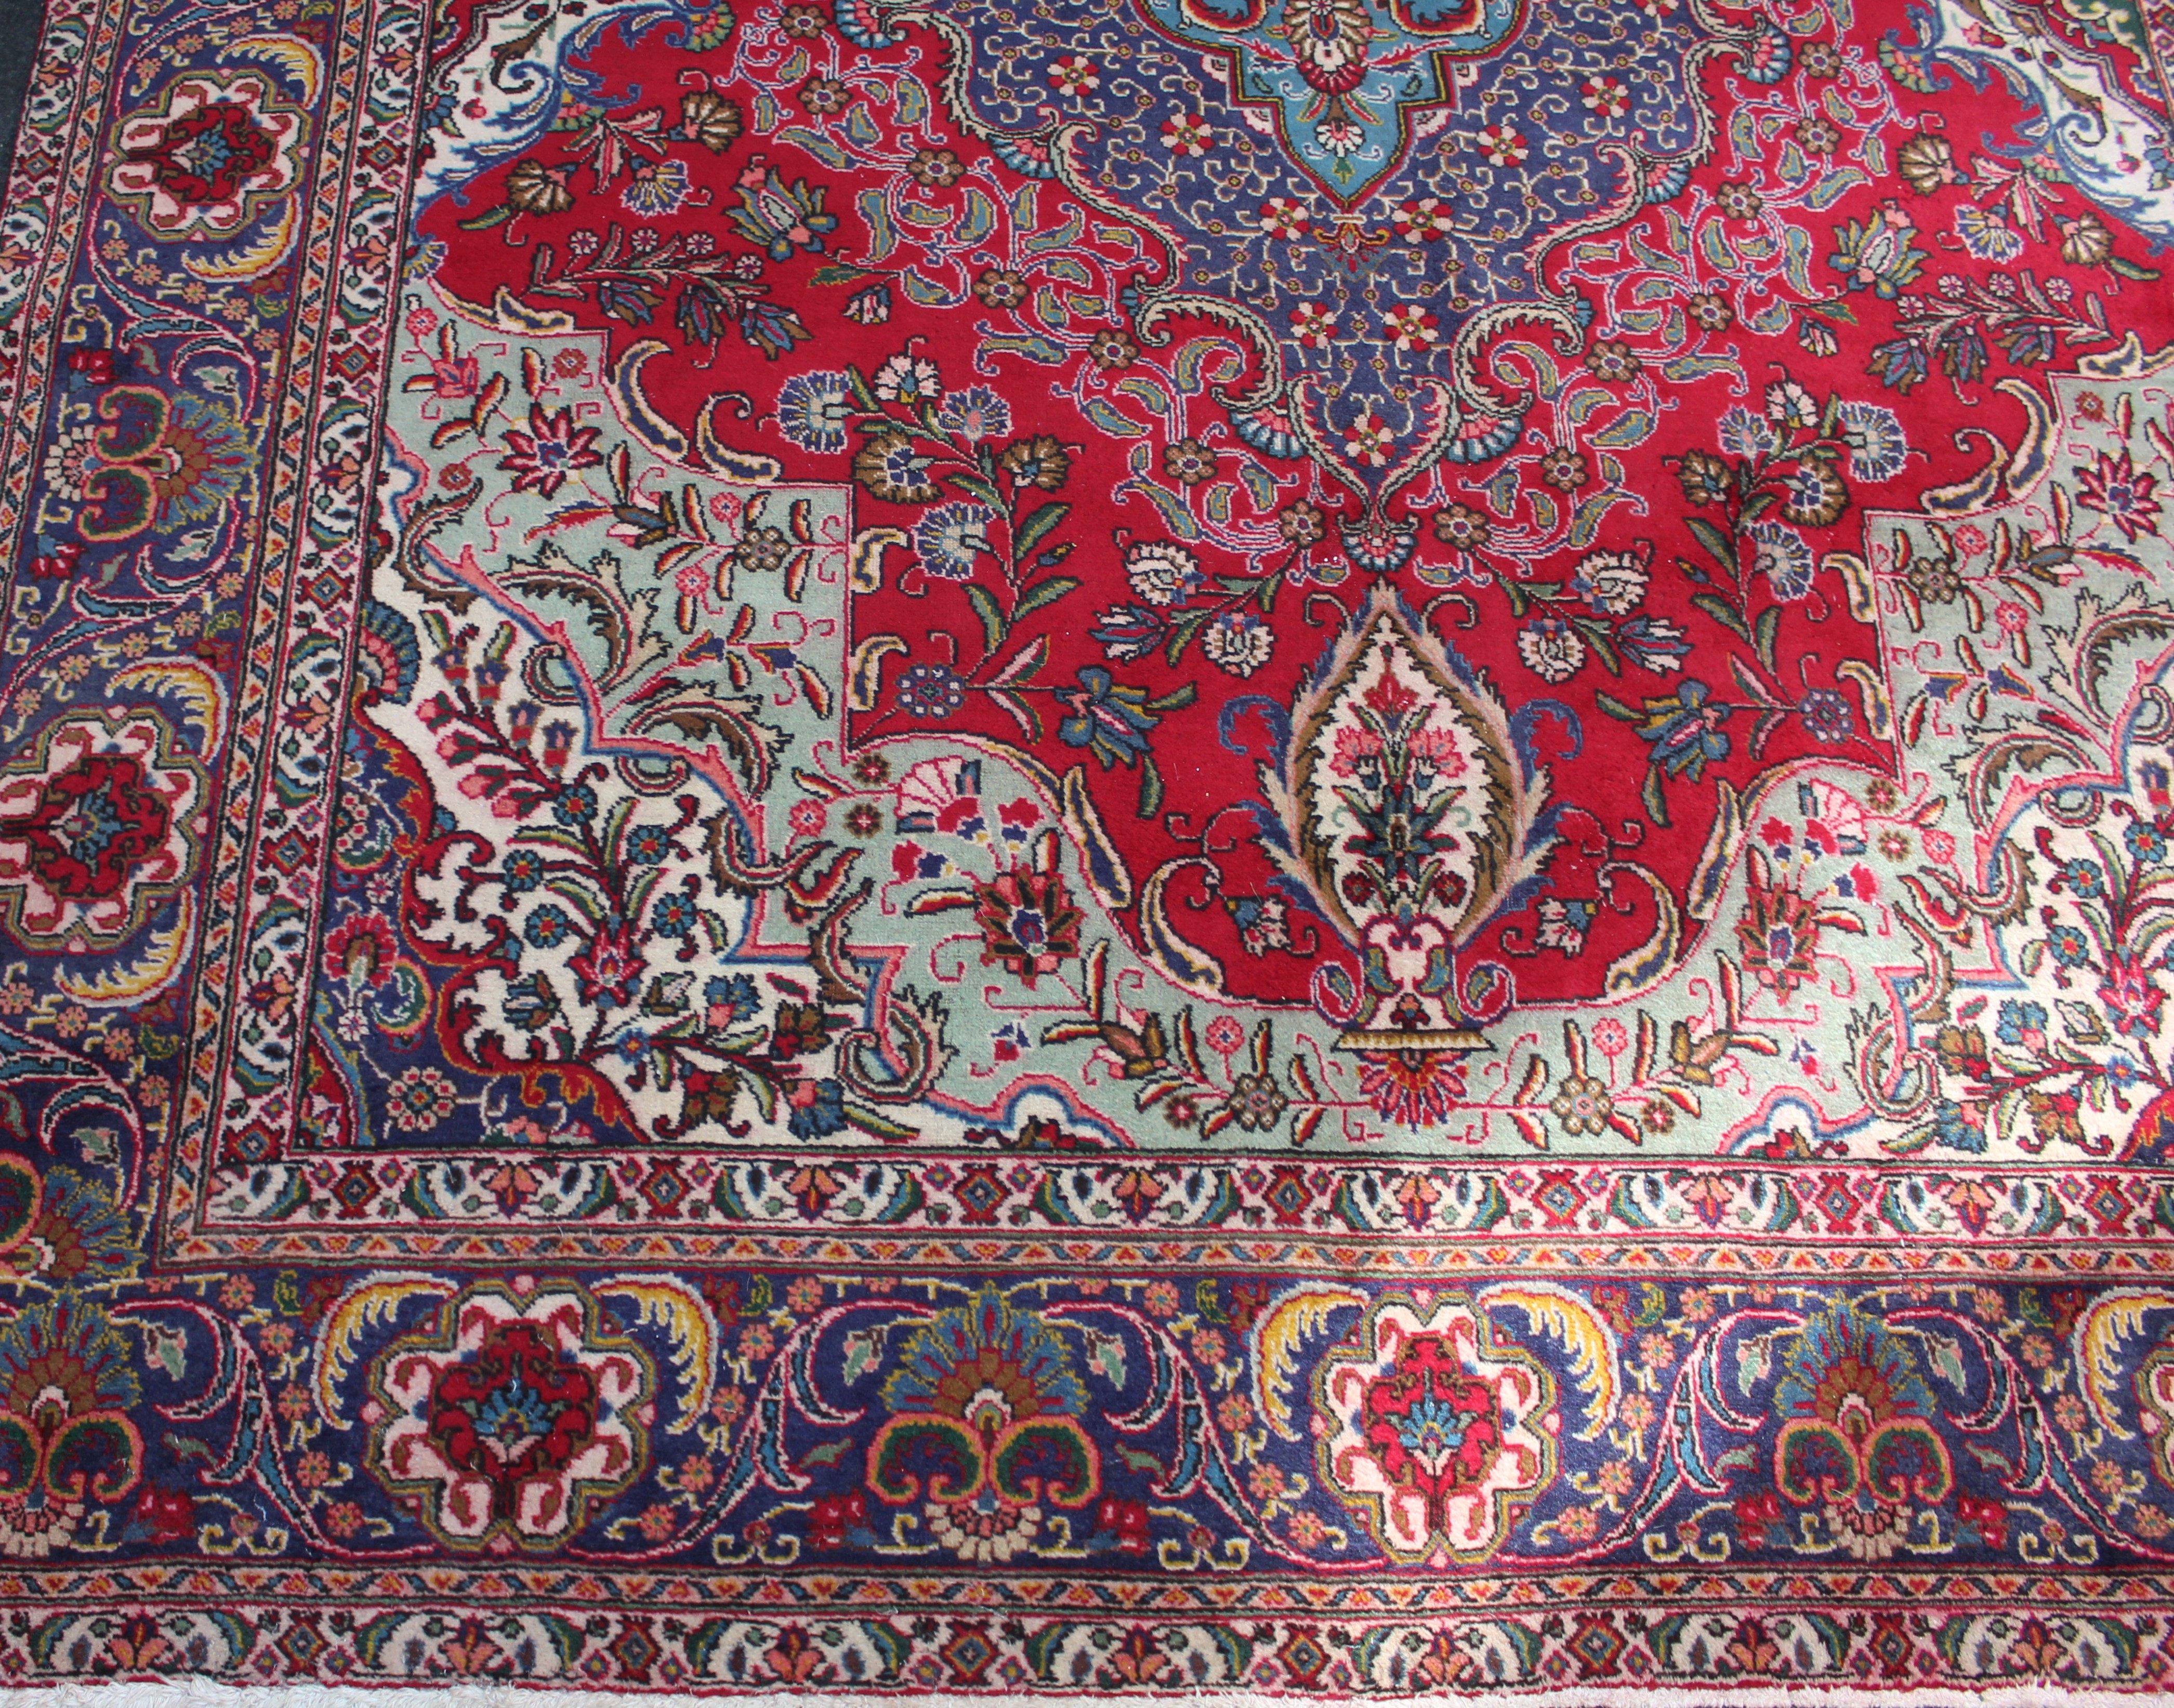 A 20th Iranian wool carpet, woven with a stepped central floral medallion on a predominantly red